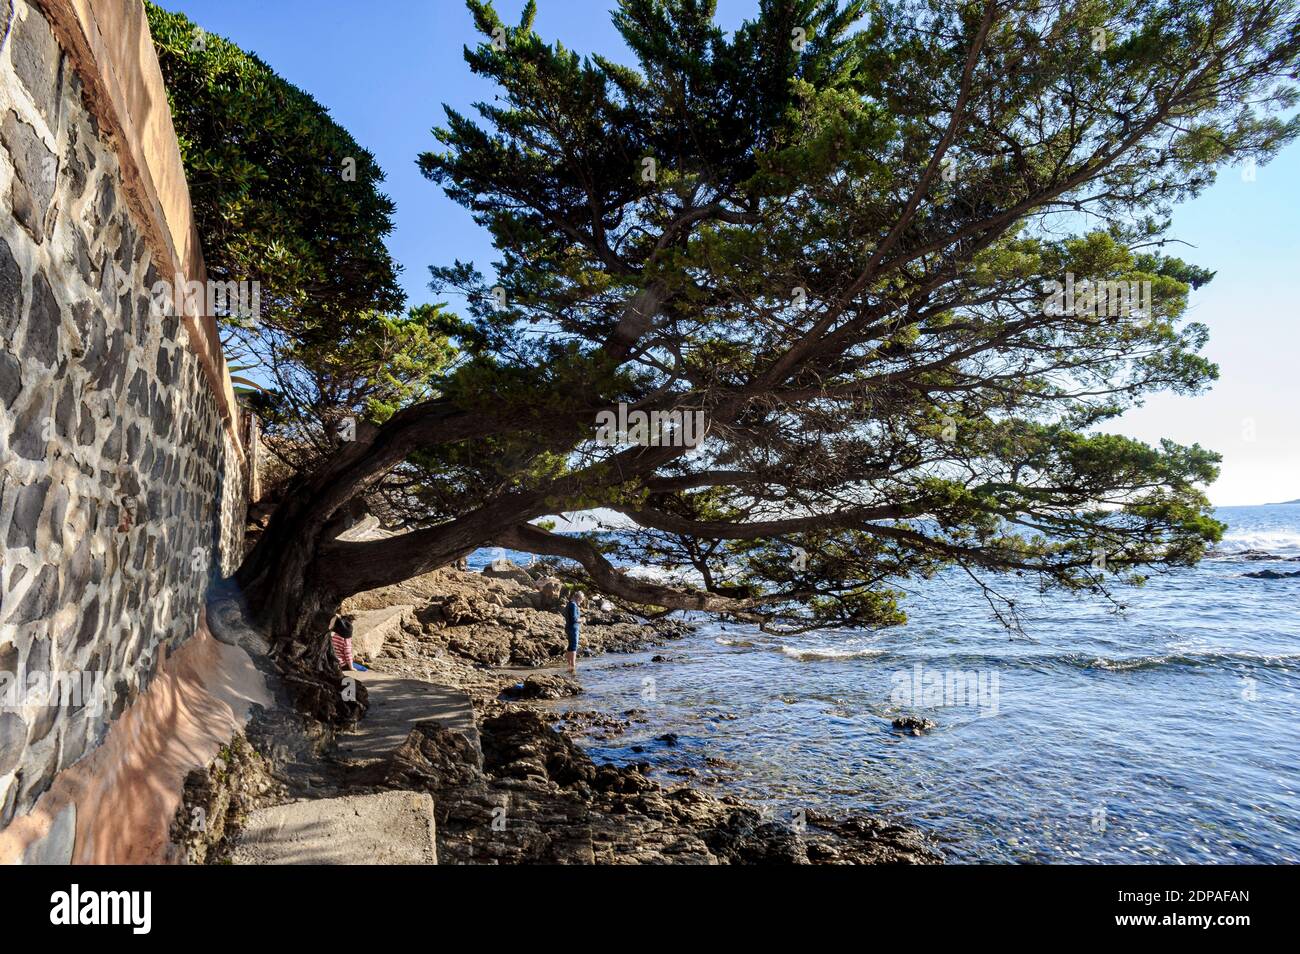 Coastal path on the seaside in the south of France. A wall bordering a rich villa is built on the trunk of a pine tree that slopes towards the water. Stock Photo